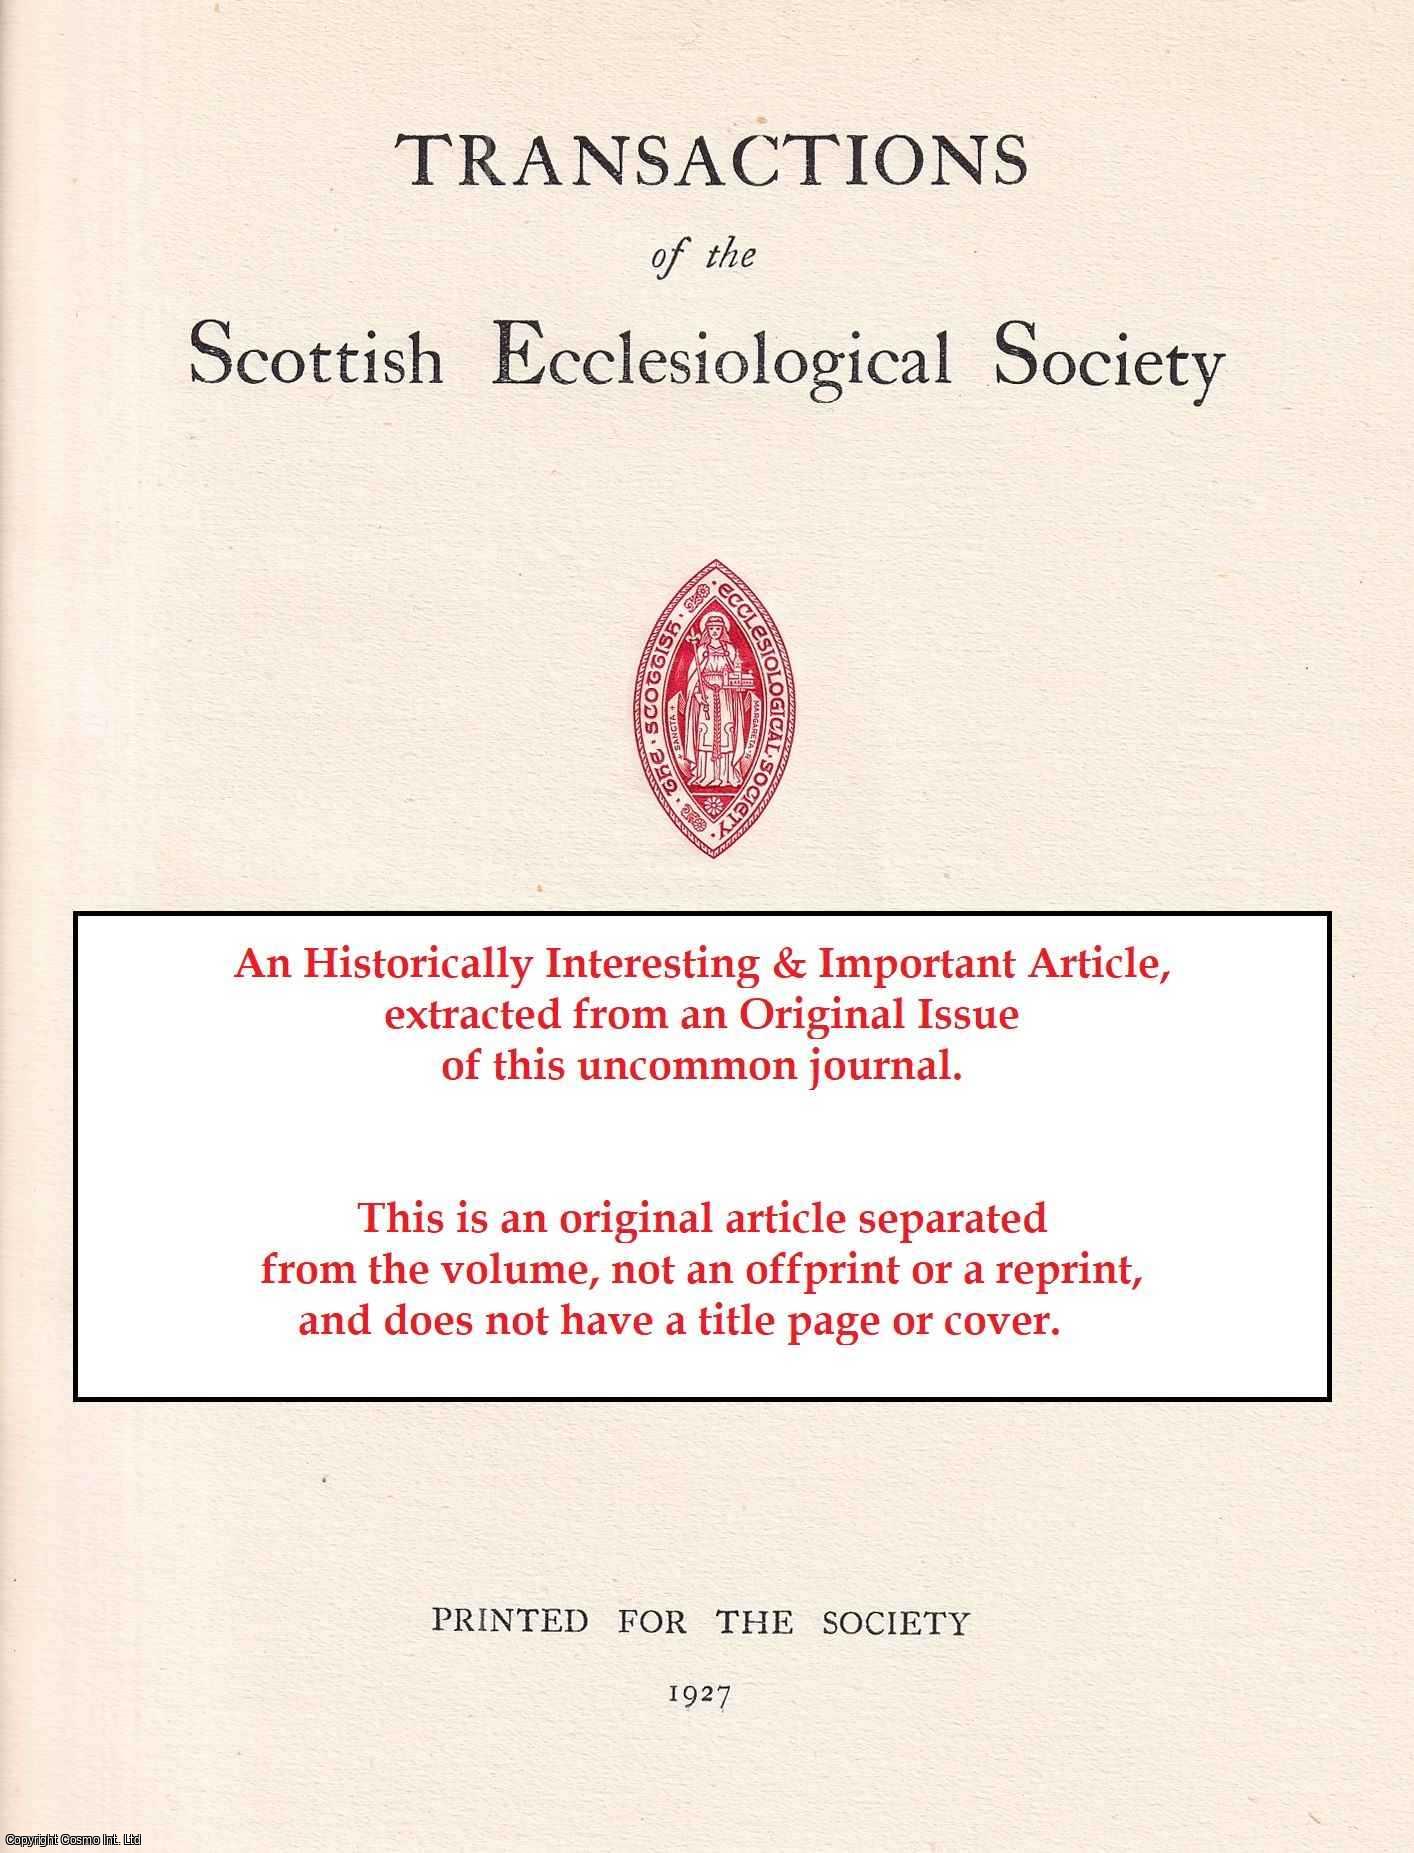 Rev Duncan Macgregor - An Ancient Gaelic Treatise on the Symbolism of the Eucharist, with Translation. An original article from the Transactions of the Aberdeen Ecclesiological Society, 1898.